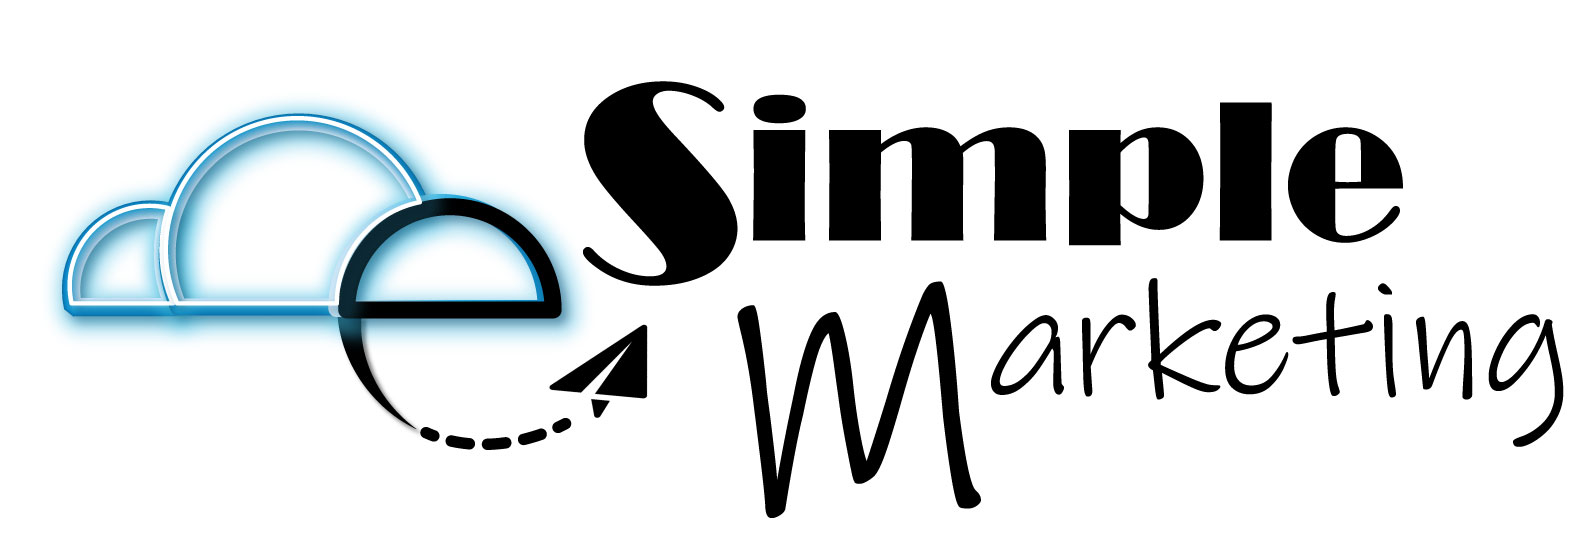 Your e-SimpleMarketing